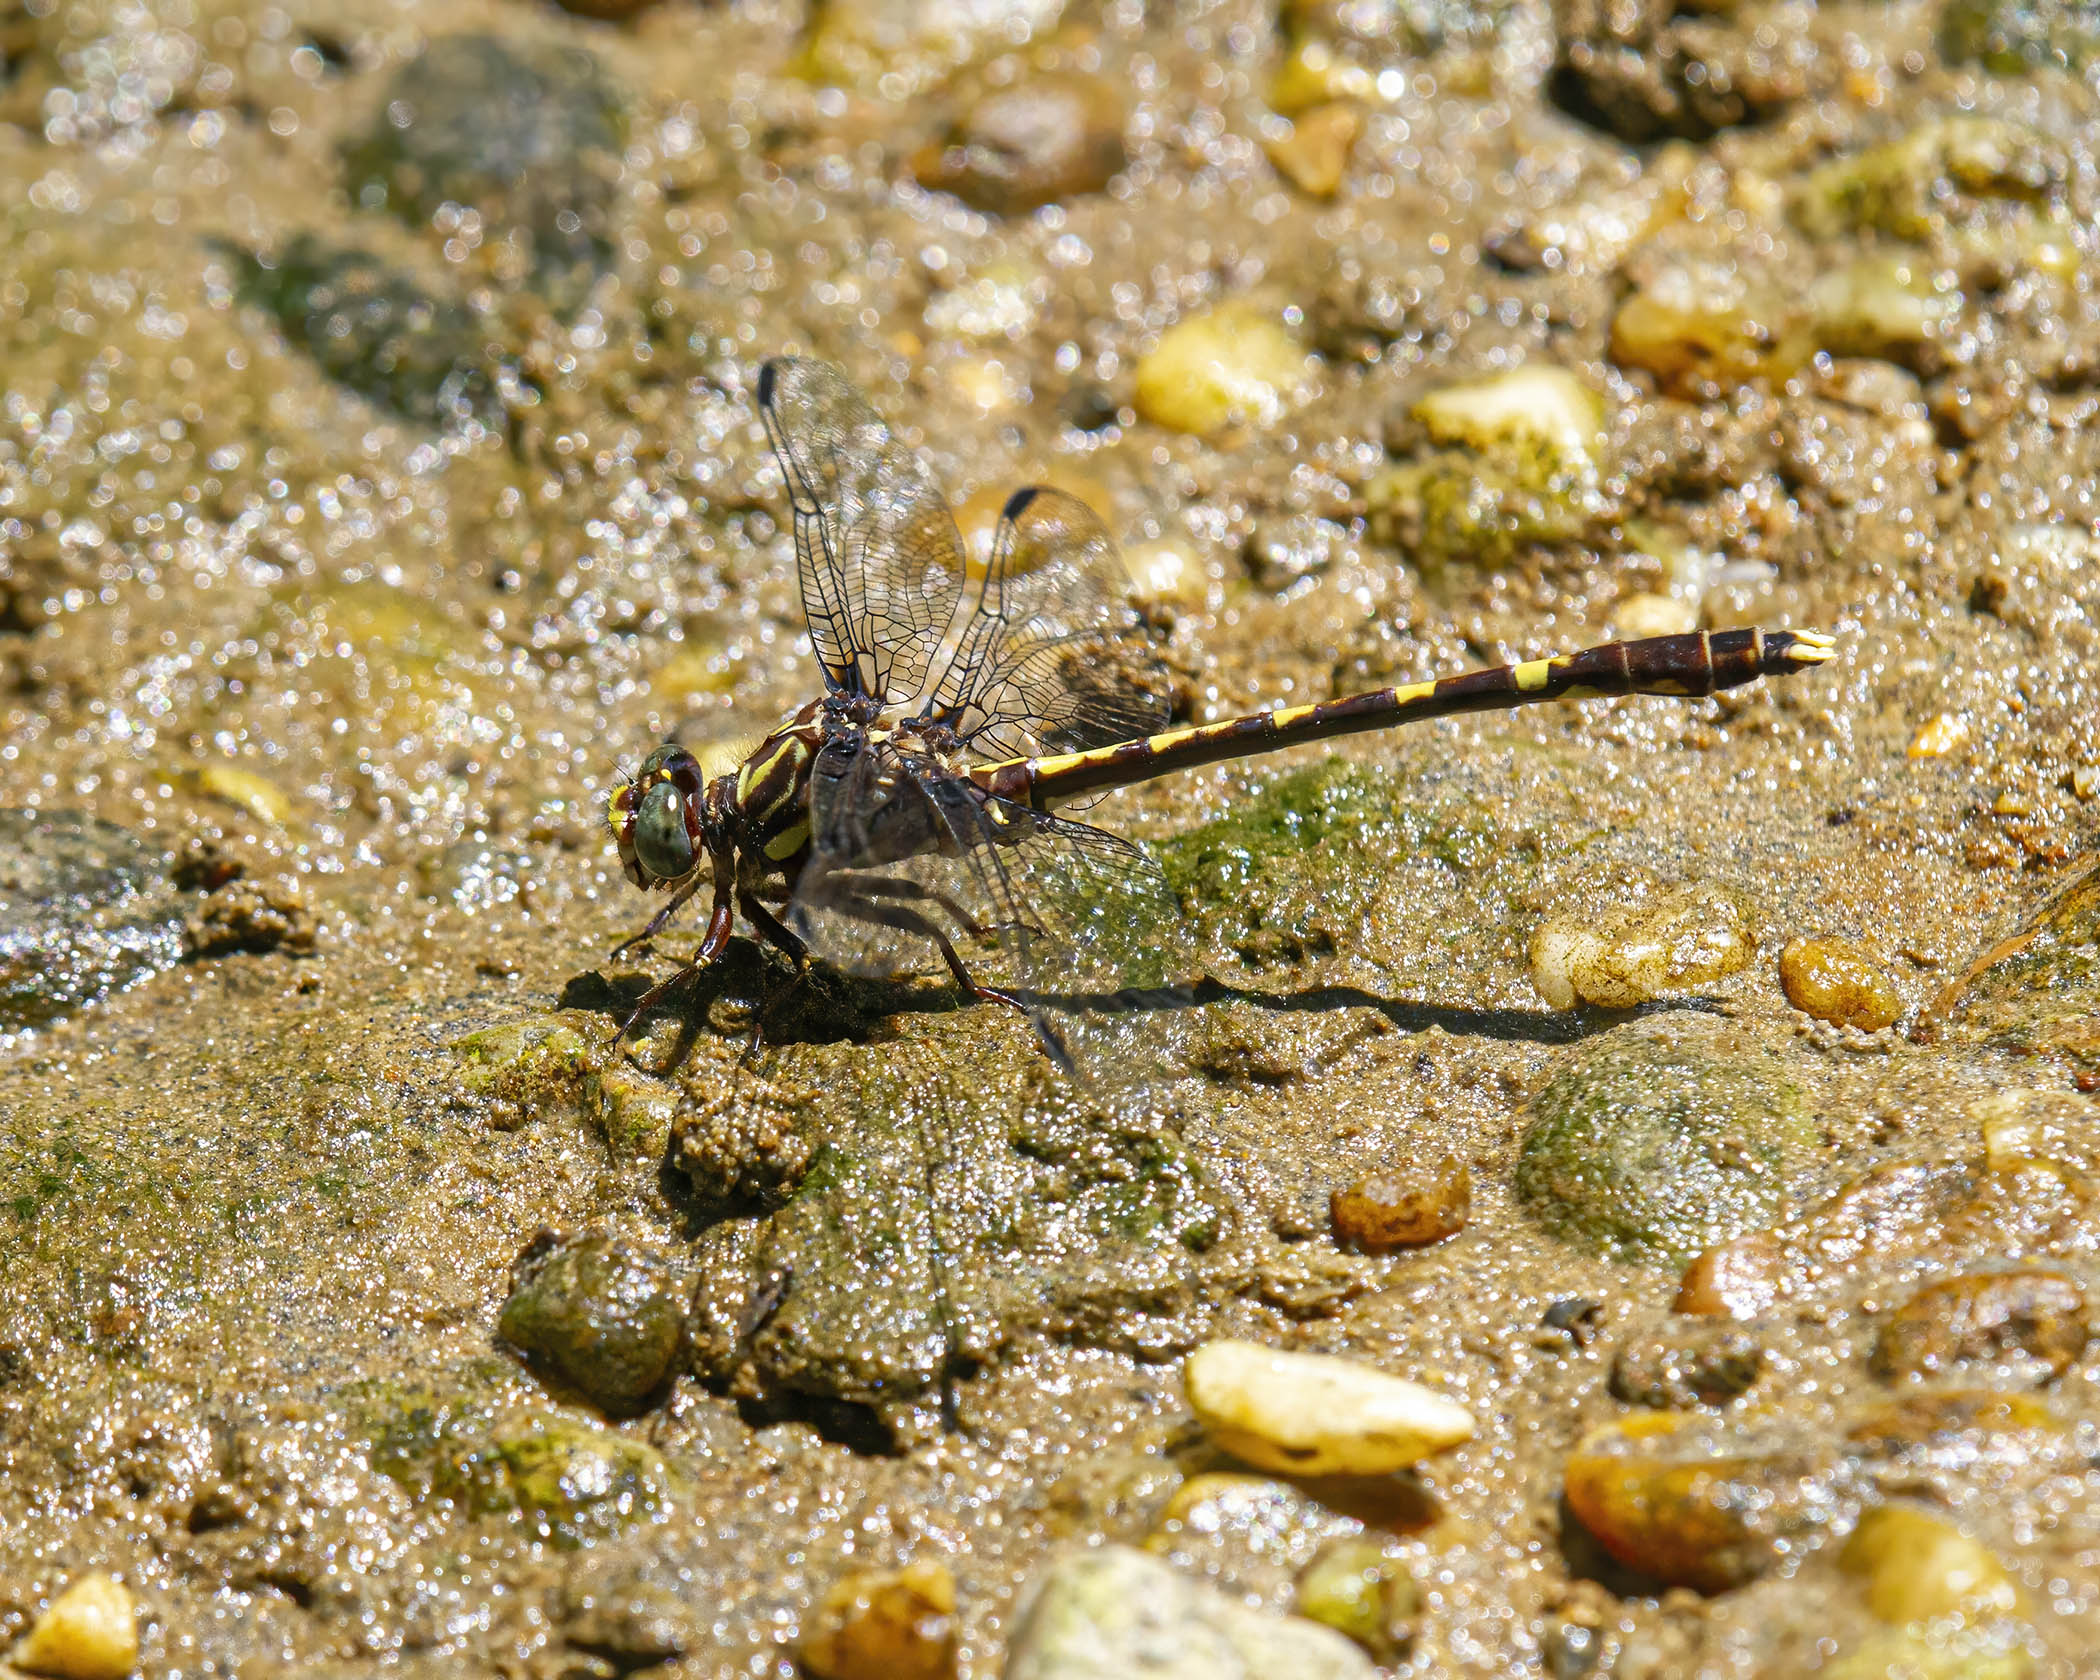 Common Sanddragon dragonfly | Mike Powell